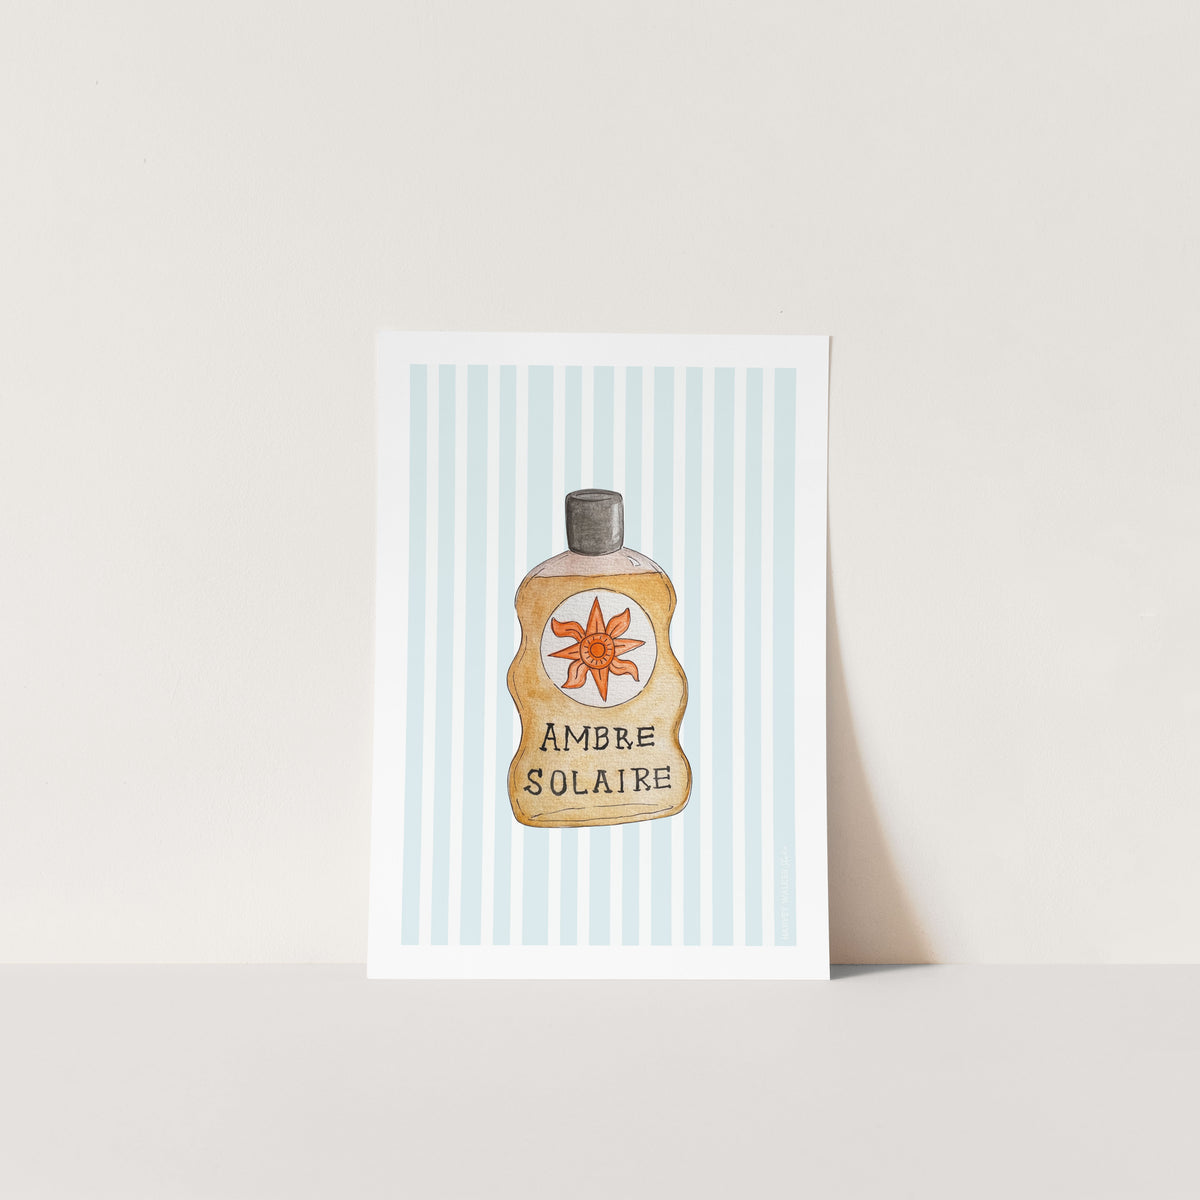 Unframed fine art print on giclee textured paper. Image of vintage suncream bottle, ambre solaire withe blue and white stripe background.